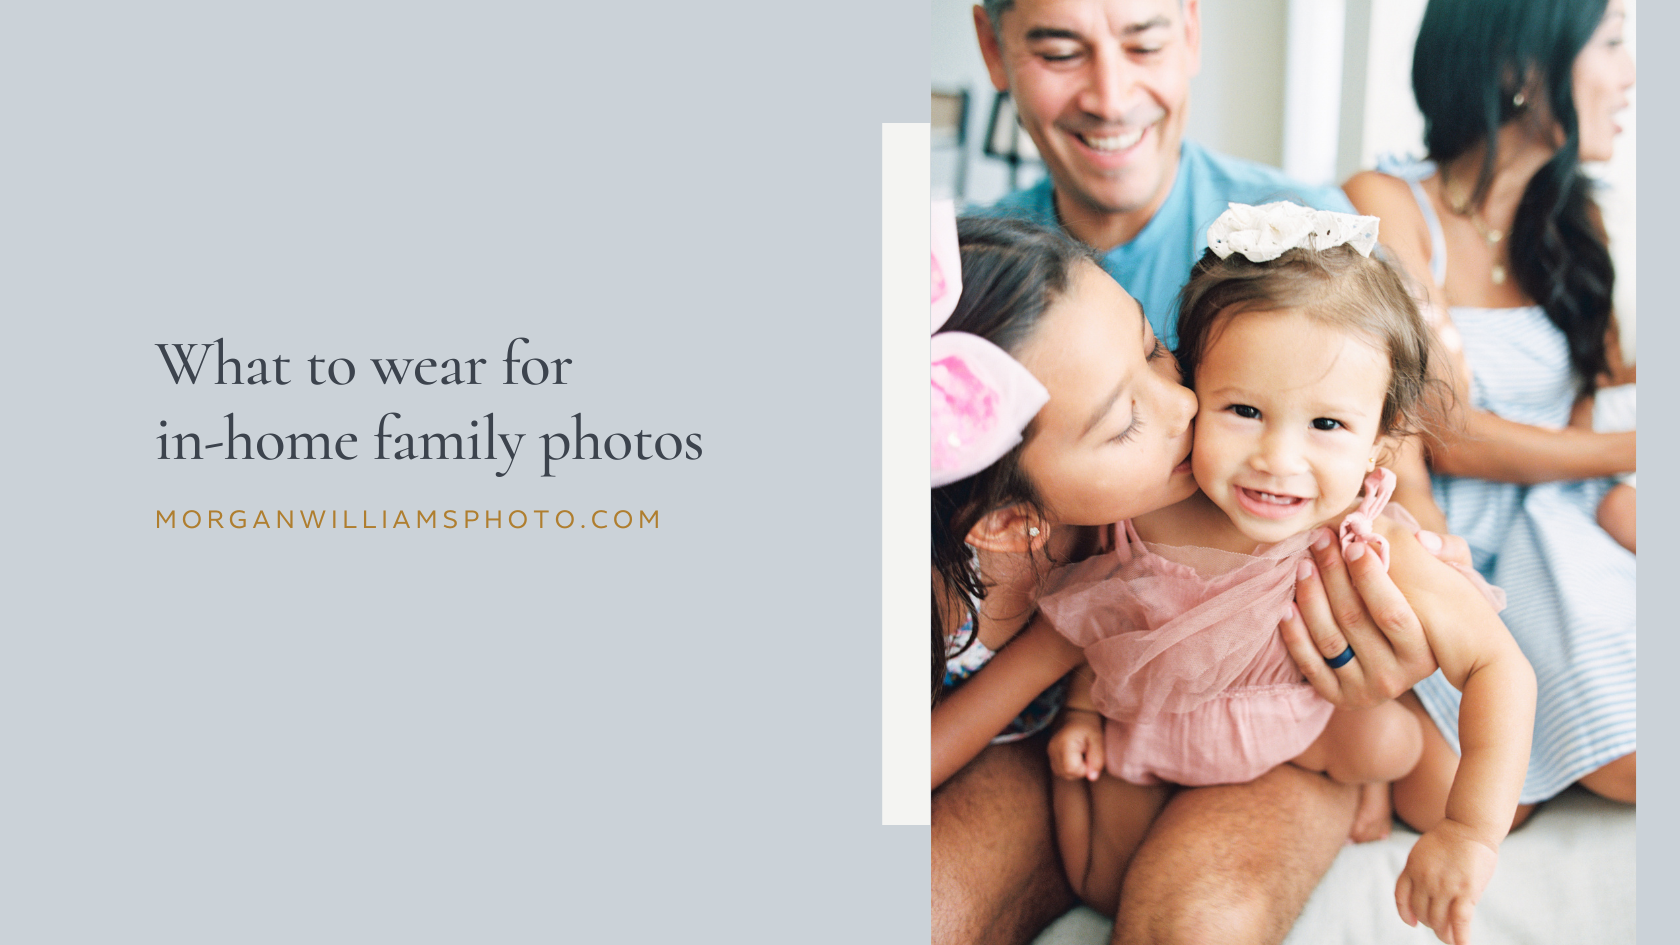 What to wear for in-home family photos